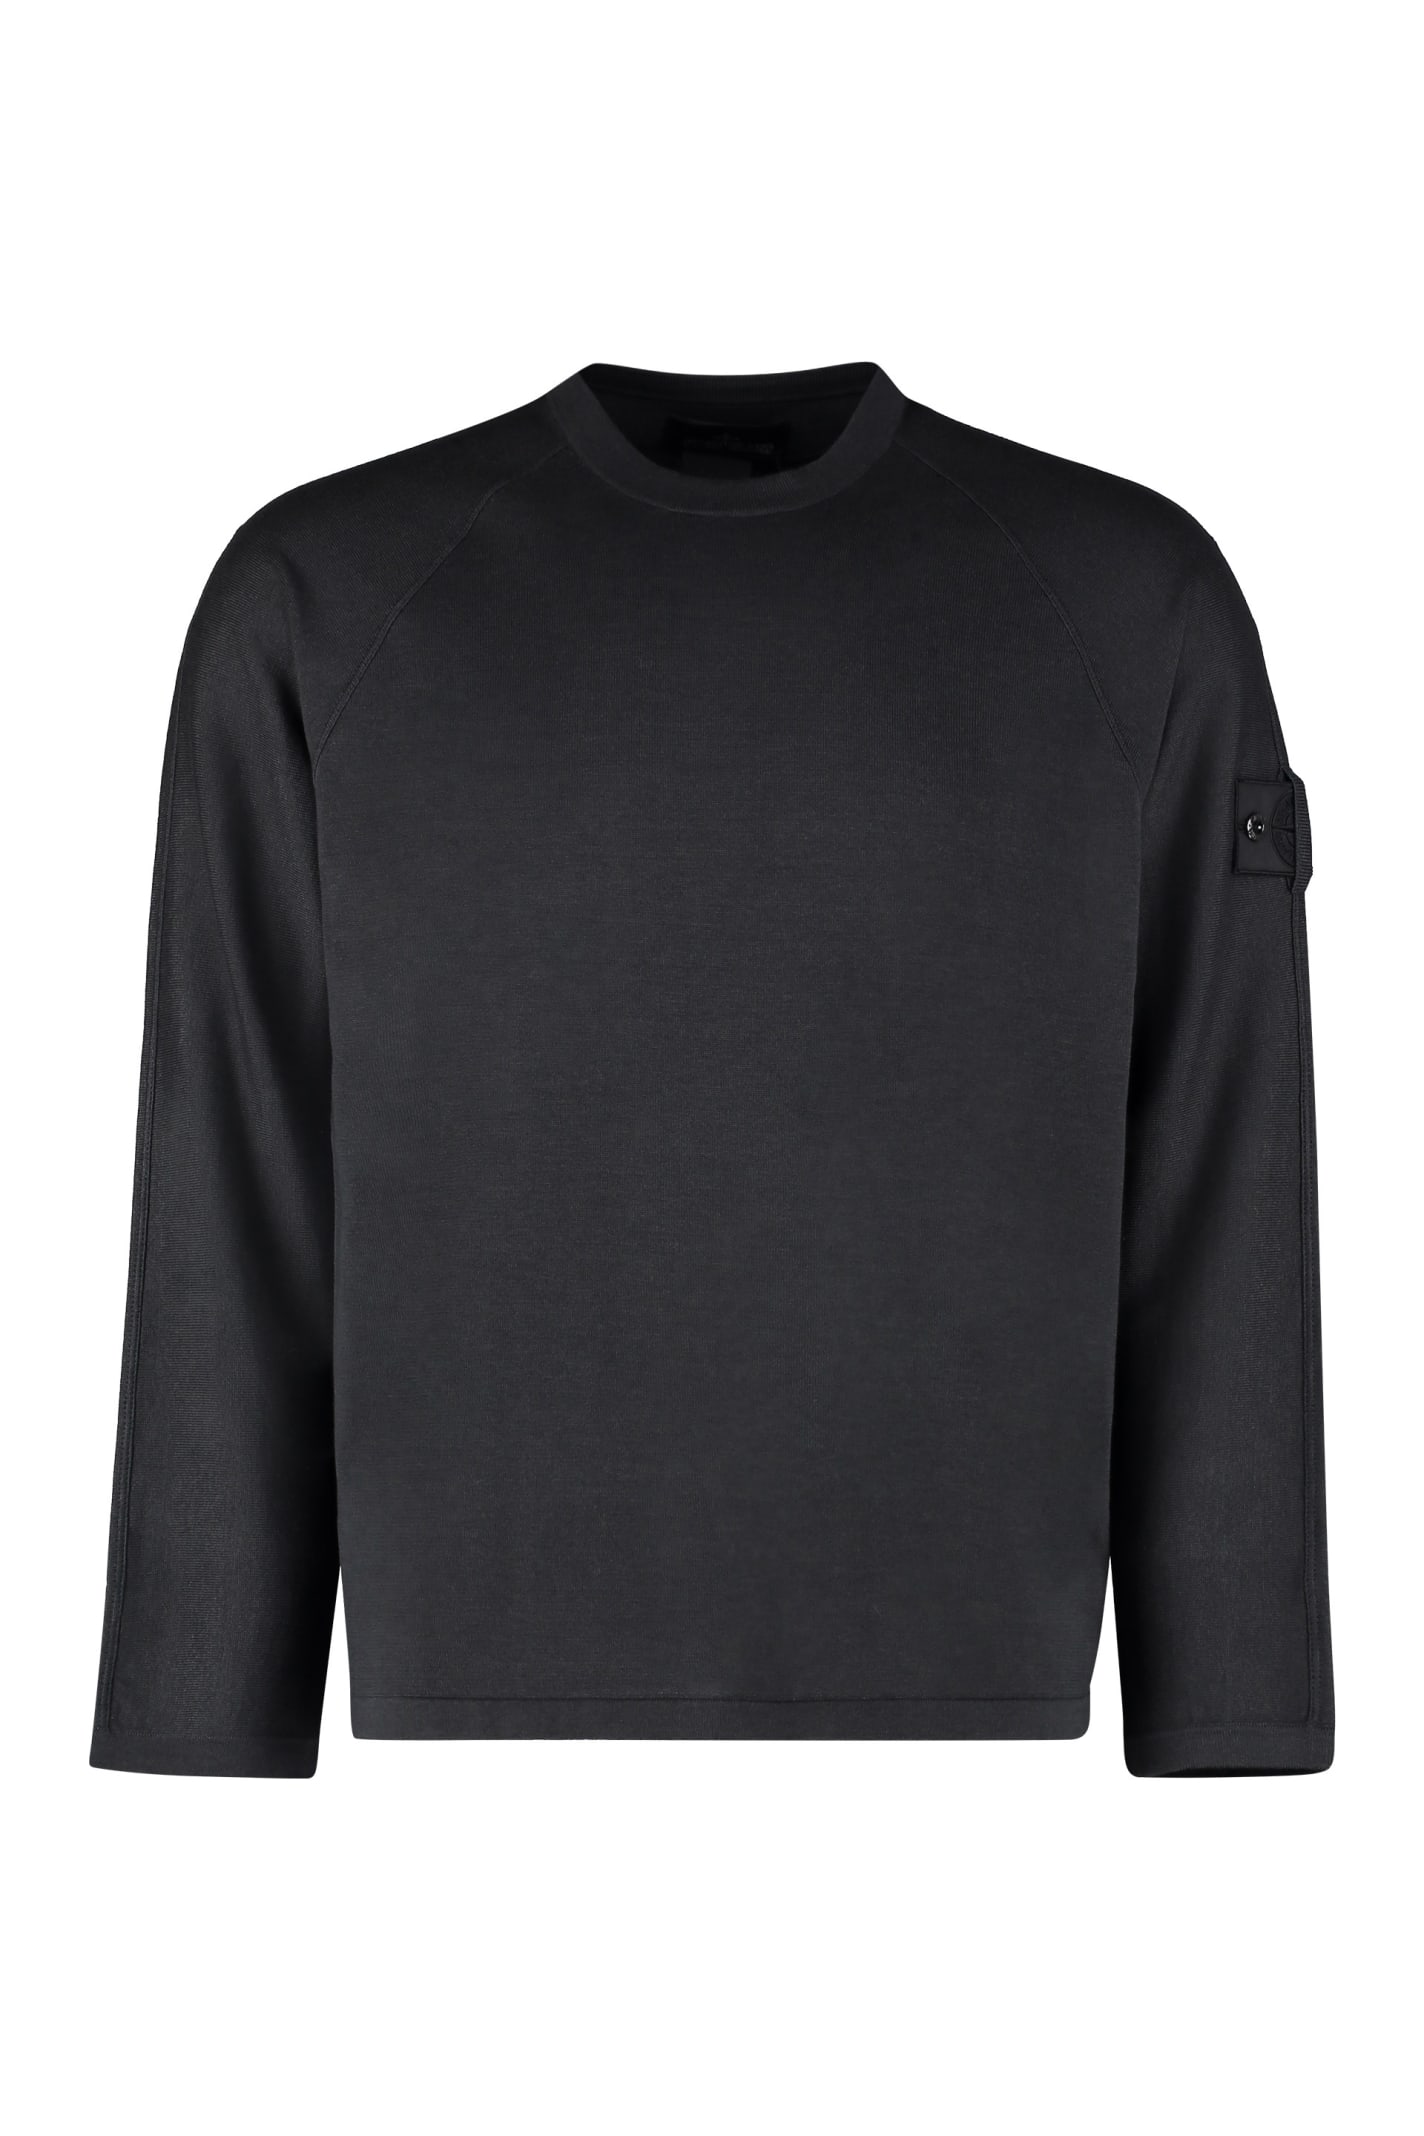 Stone Island Shadow Project Silk And Cotton Blend Sweater